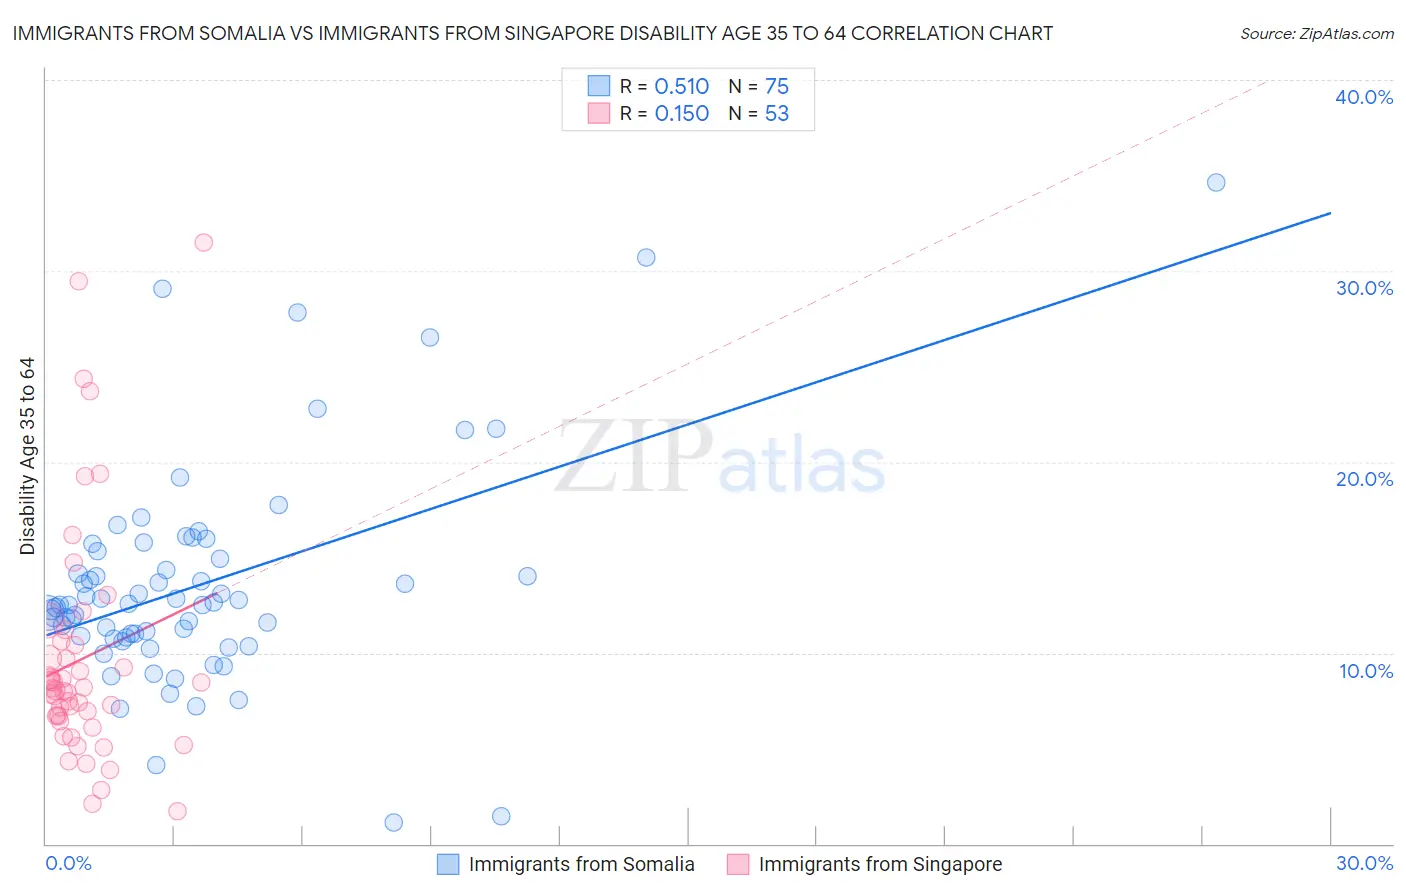 Immigrants from Somalia vs Immigrants from Singapore Disability Age 35 to 64